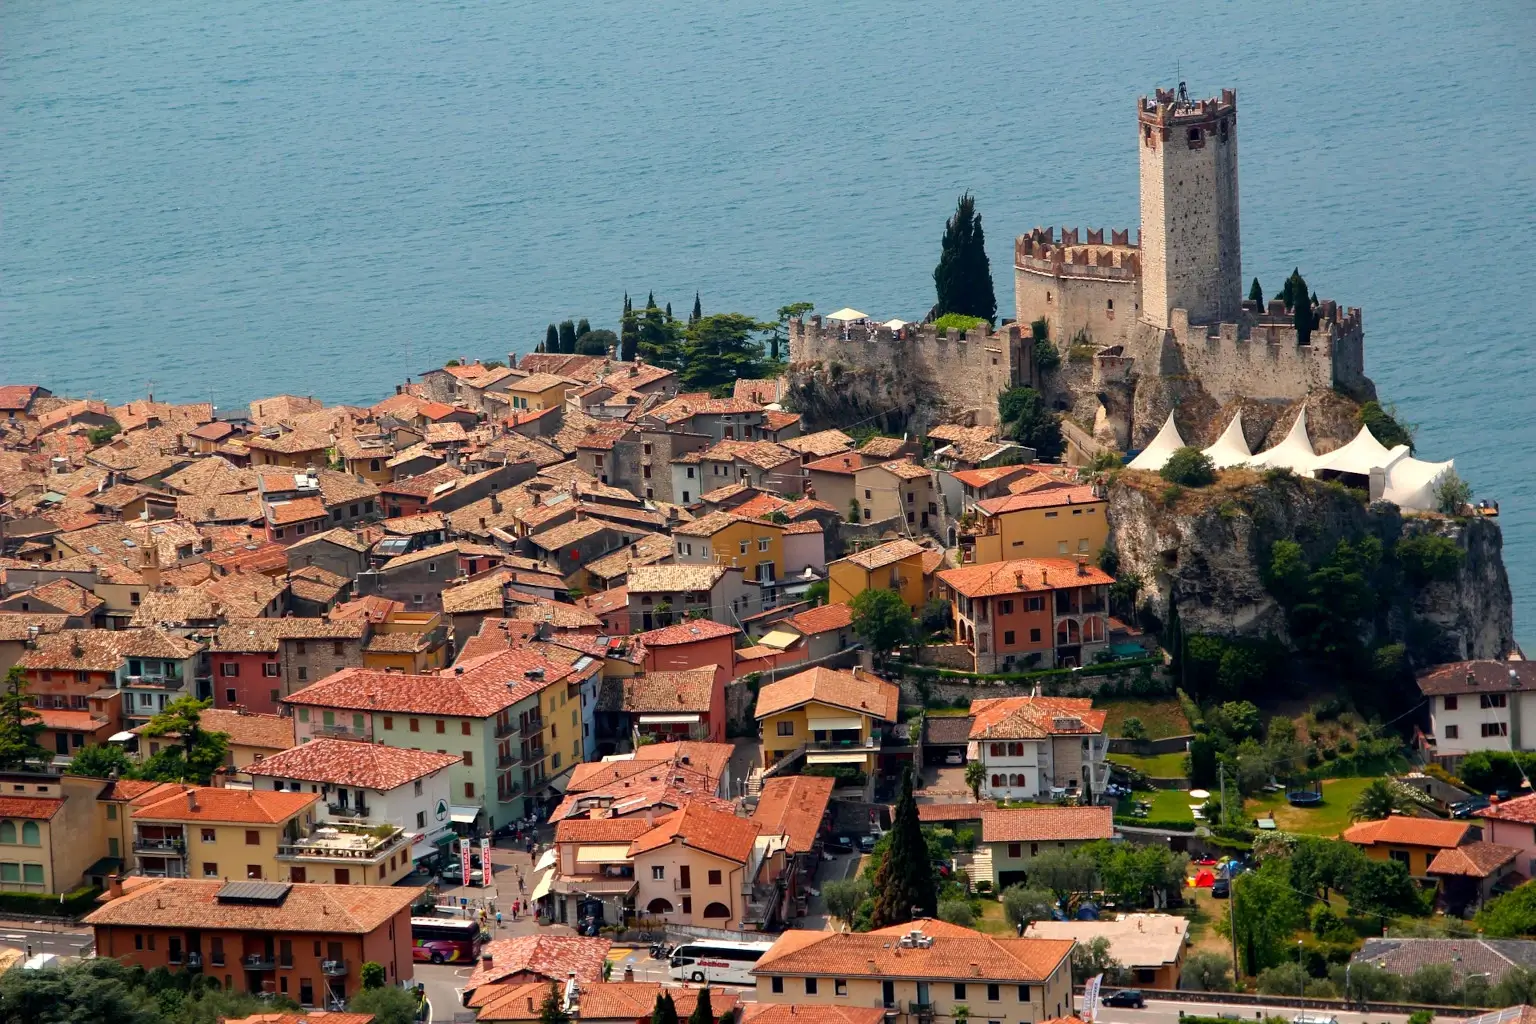 What to do in Malcesine